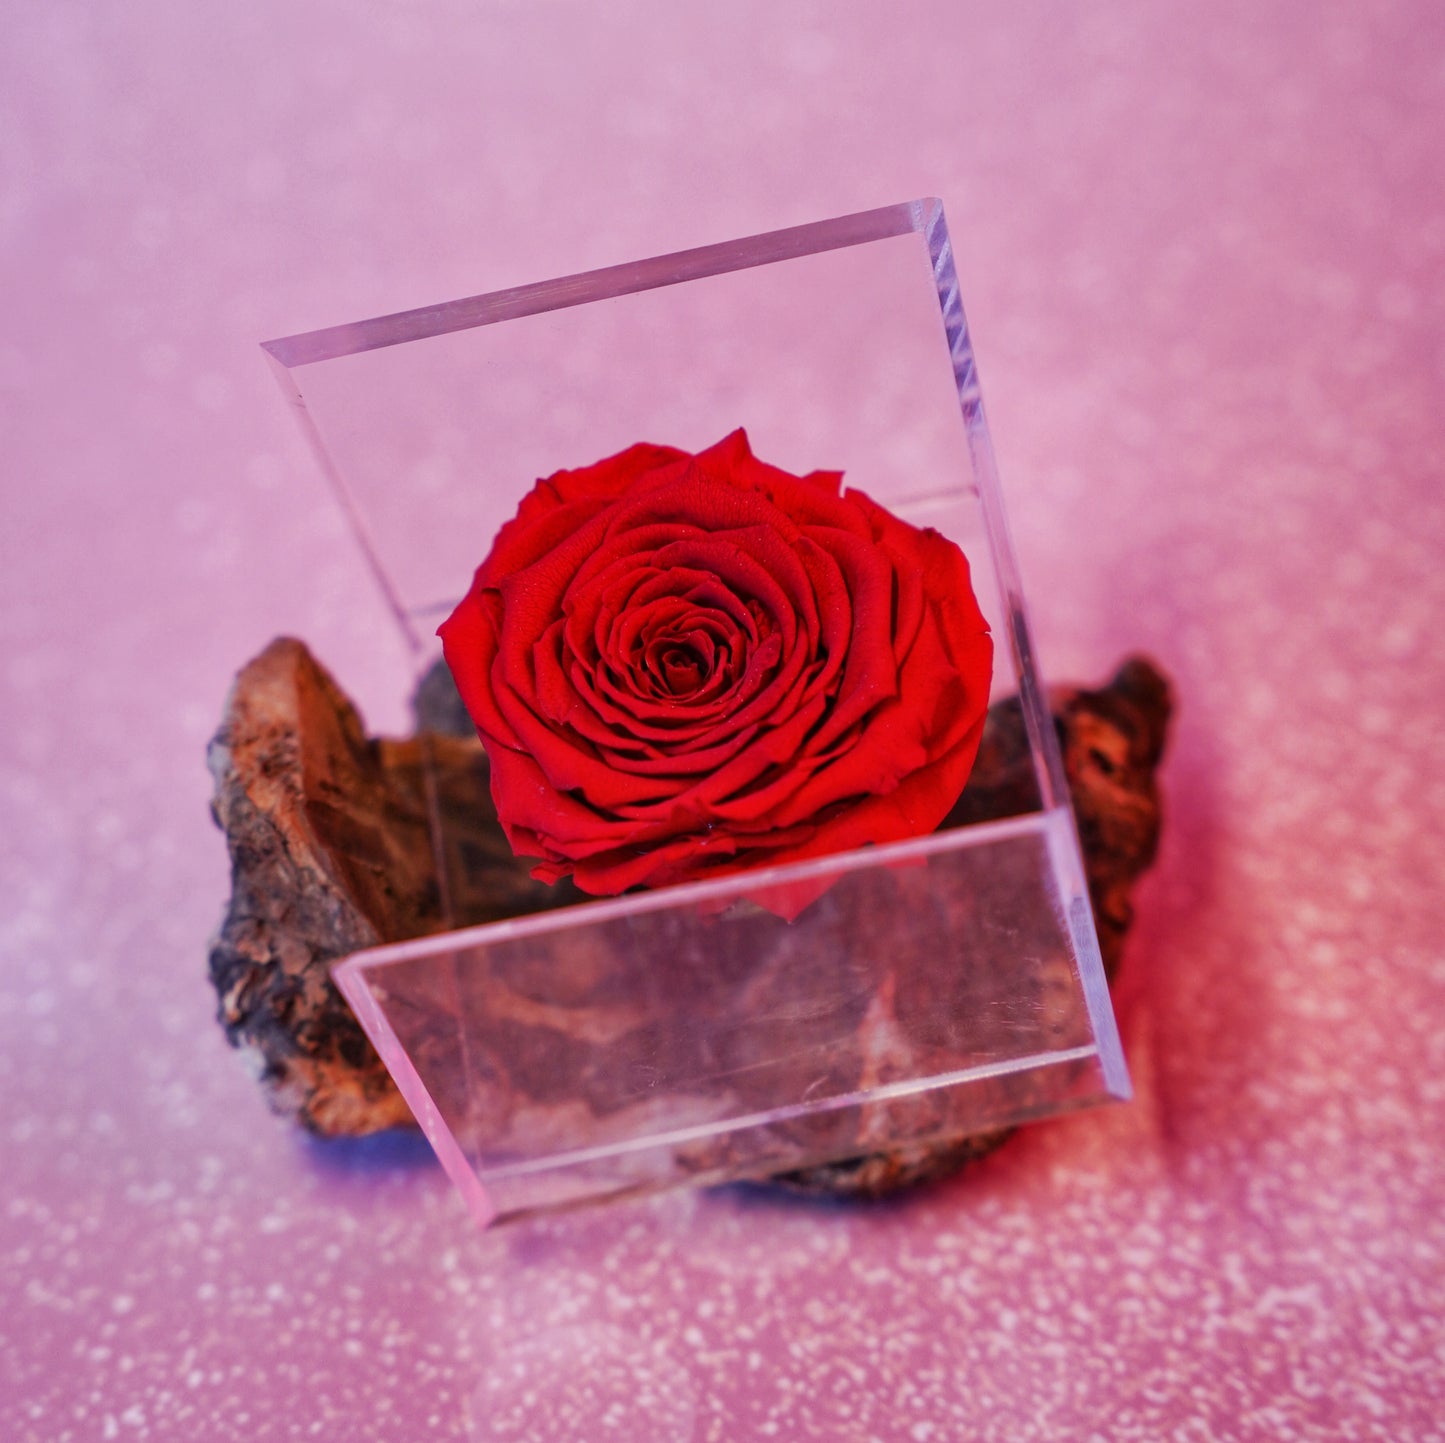 Preserved Scented Flowers in Acrylic Box - Deli Ambience